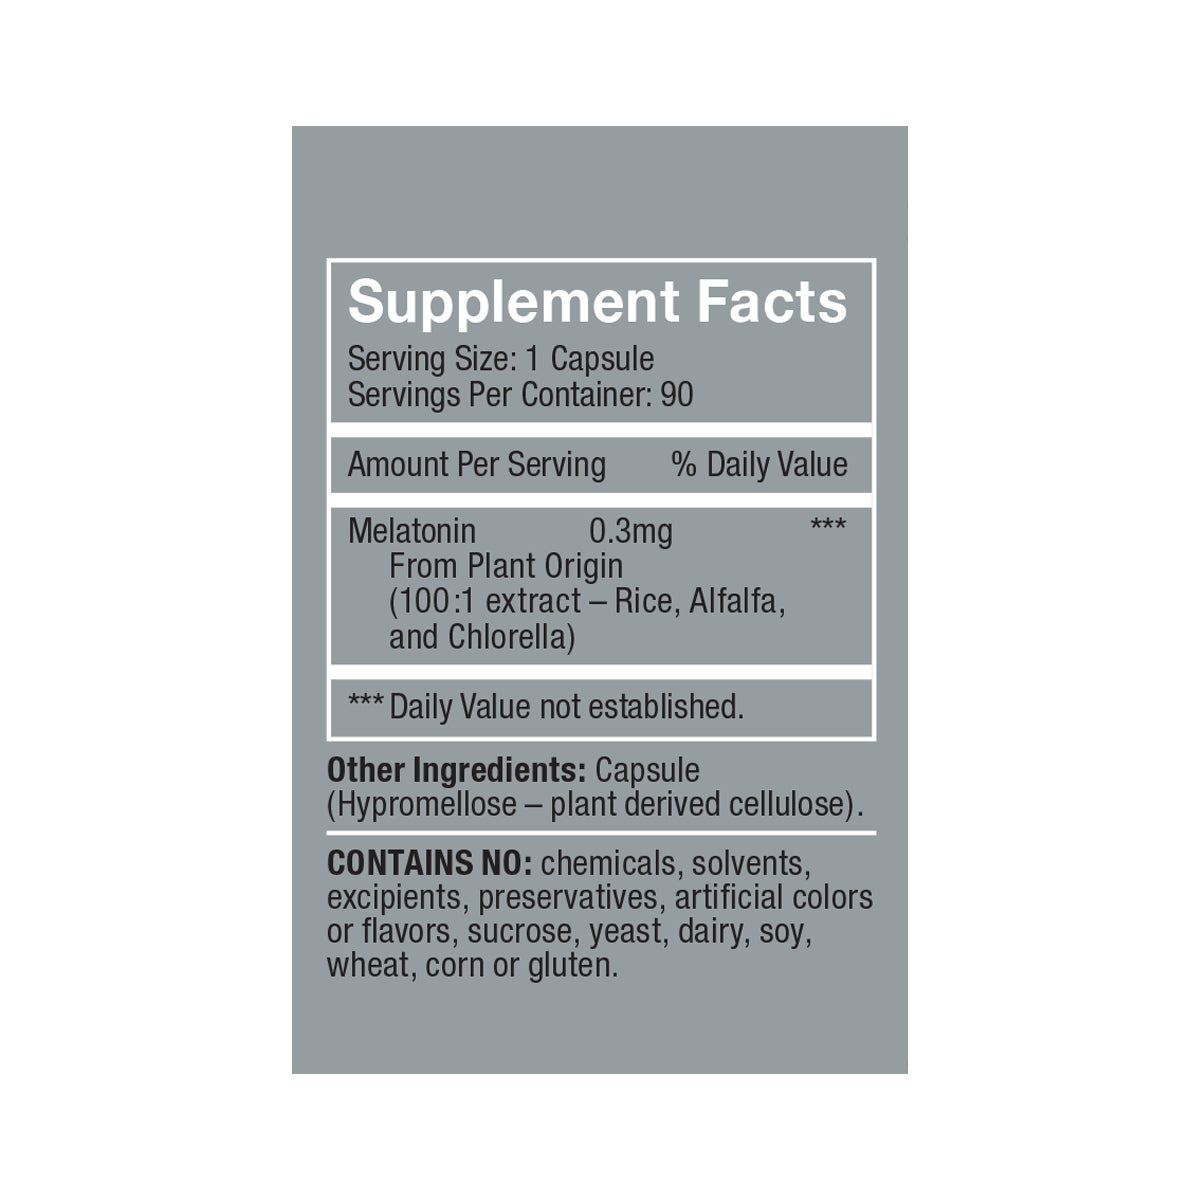 Herbatonin 0.3mg<br>4-Pack side panel product box supplement facts, white/black text on dark gray background: Serving size 1 capsule, servings per container 90, melatonin 0.3mg from plant origin (100:1 extract rice, alfalfa, and chlorella), other ingredient is capsule (hypromellose-plant derived cellulose), contains no chemicals, solvents, excipients, preservatives, artificial colors or flavors, sucrose, yeast, dairy, soy, wheat, corn or gluten